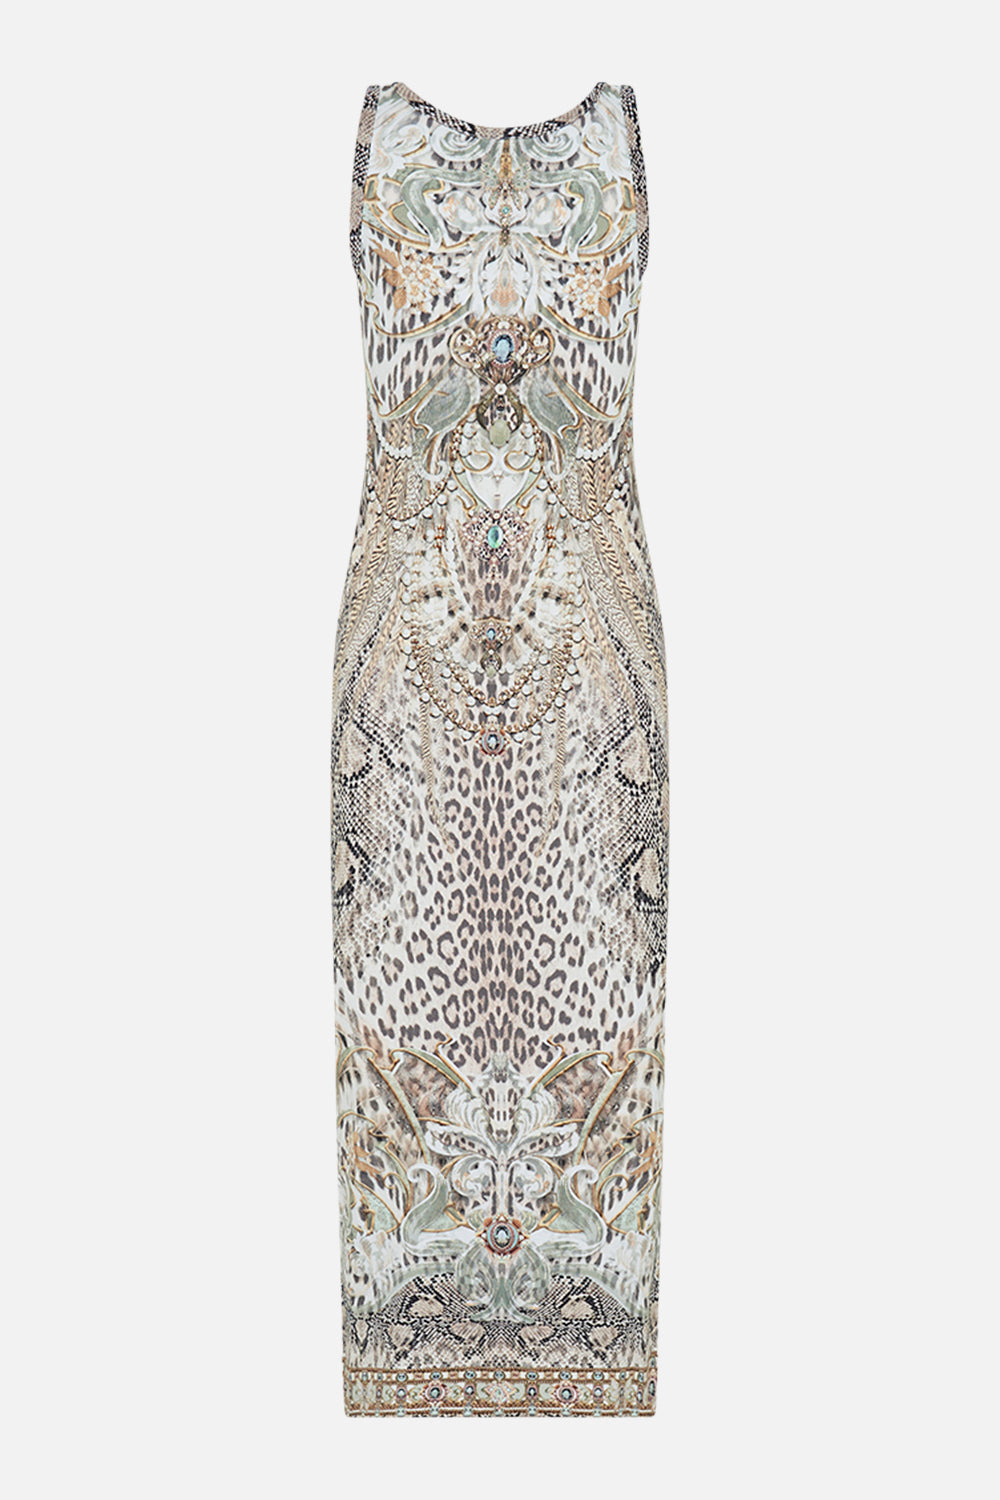 CAMILLA jersey dress in Looking Glass Houses print 